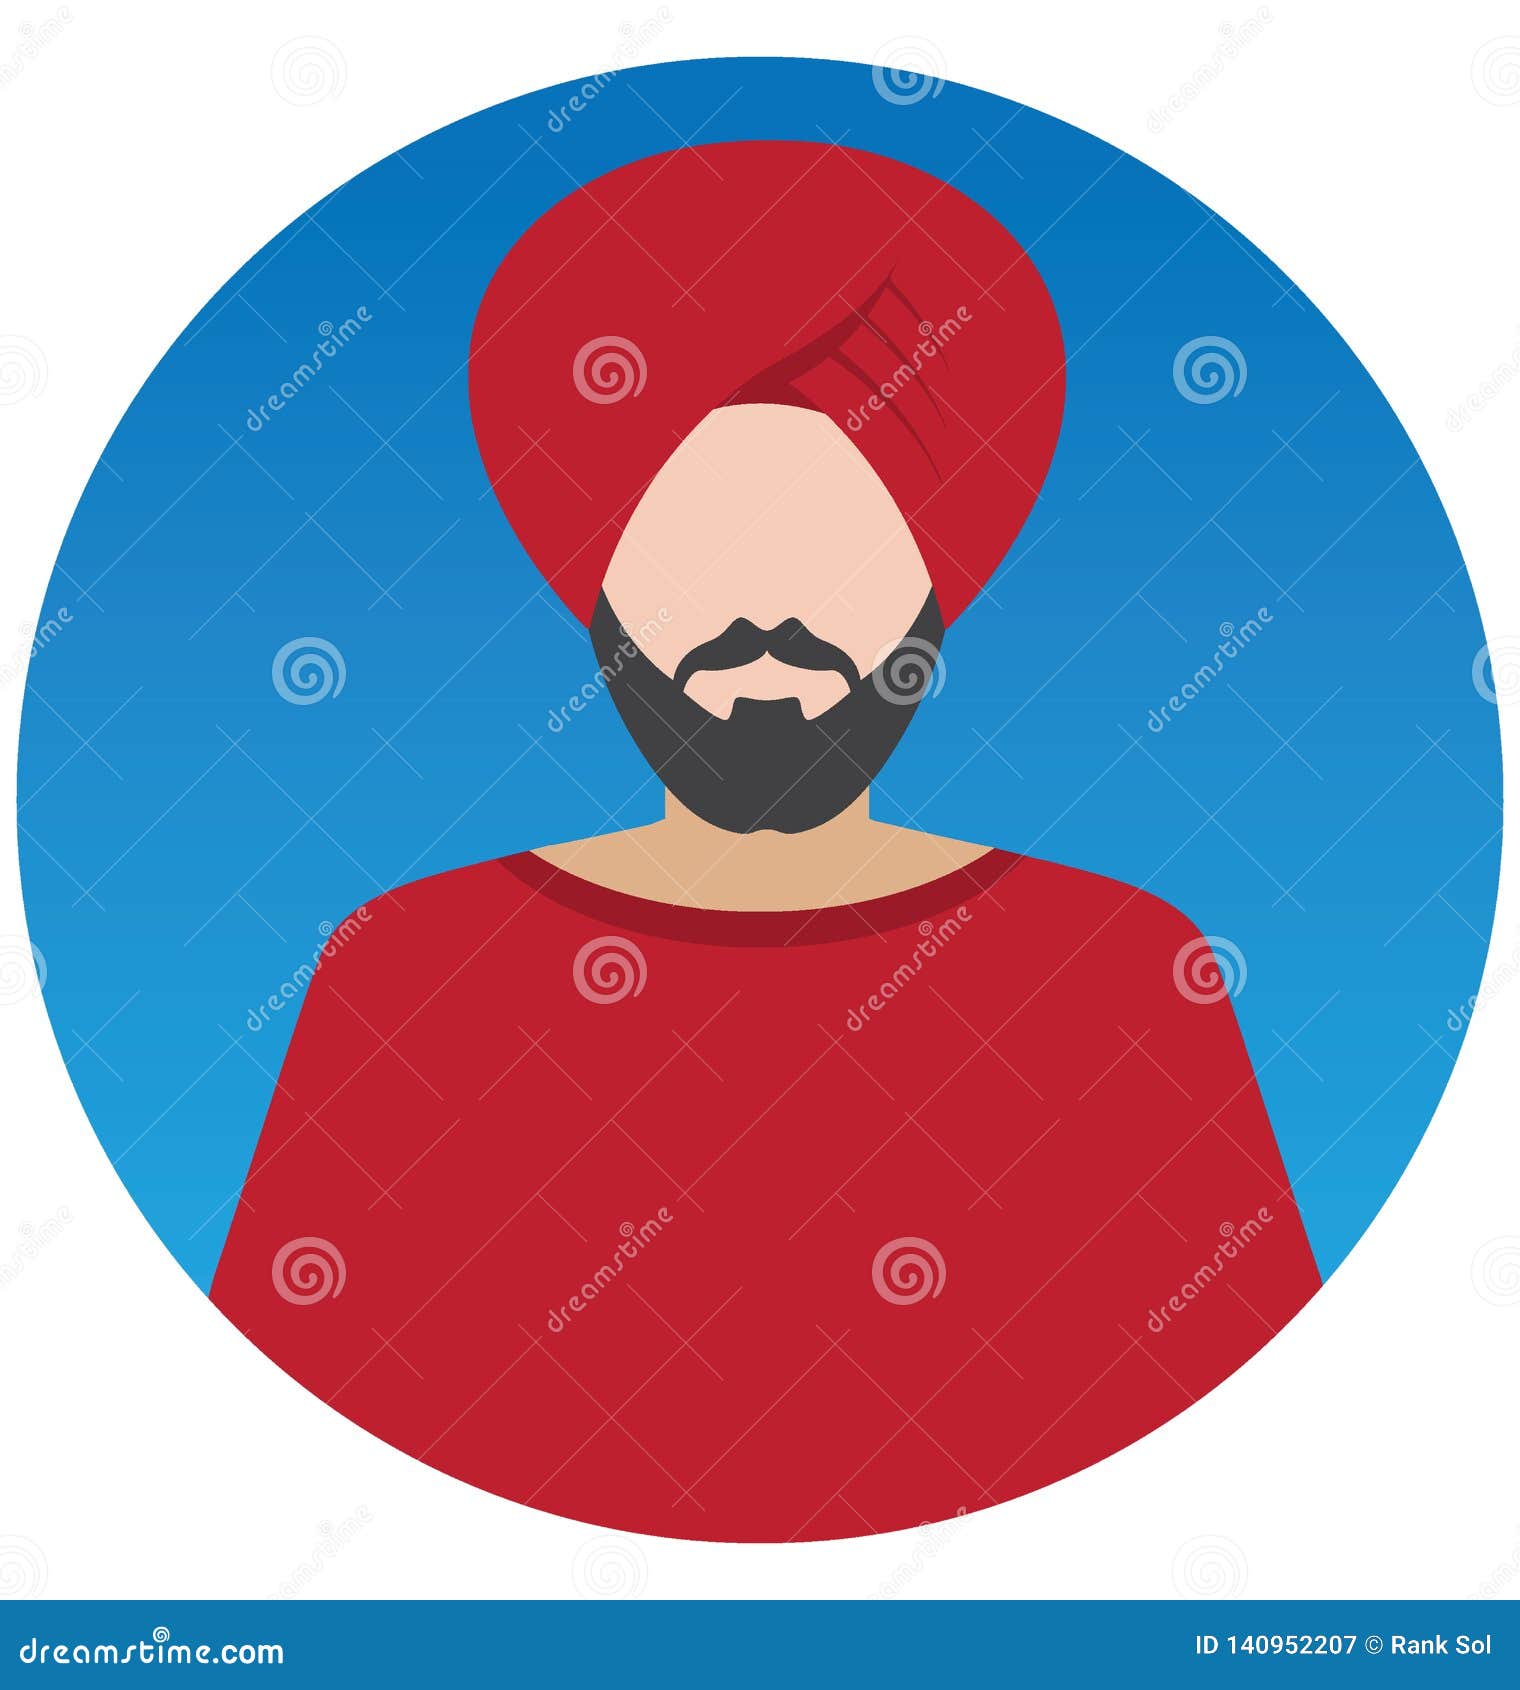 sikh   icon which can easily modify or edit